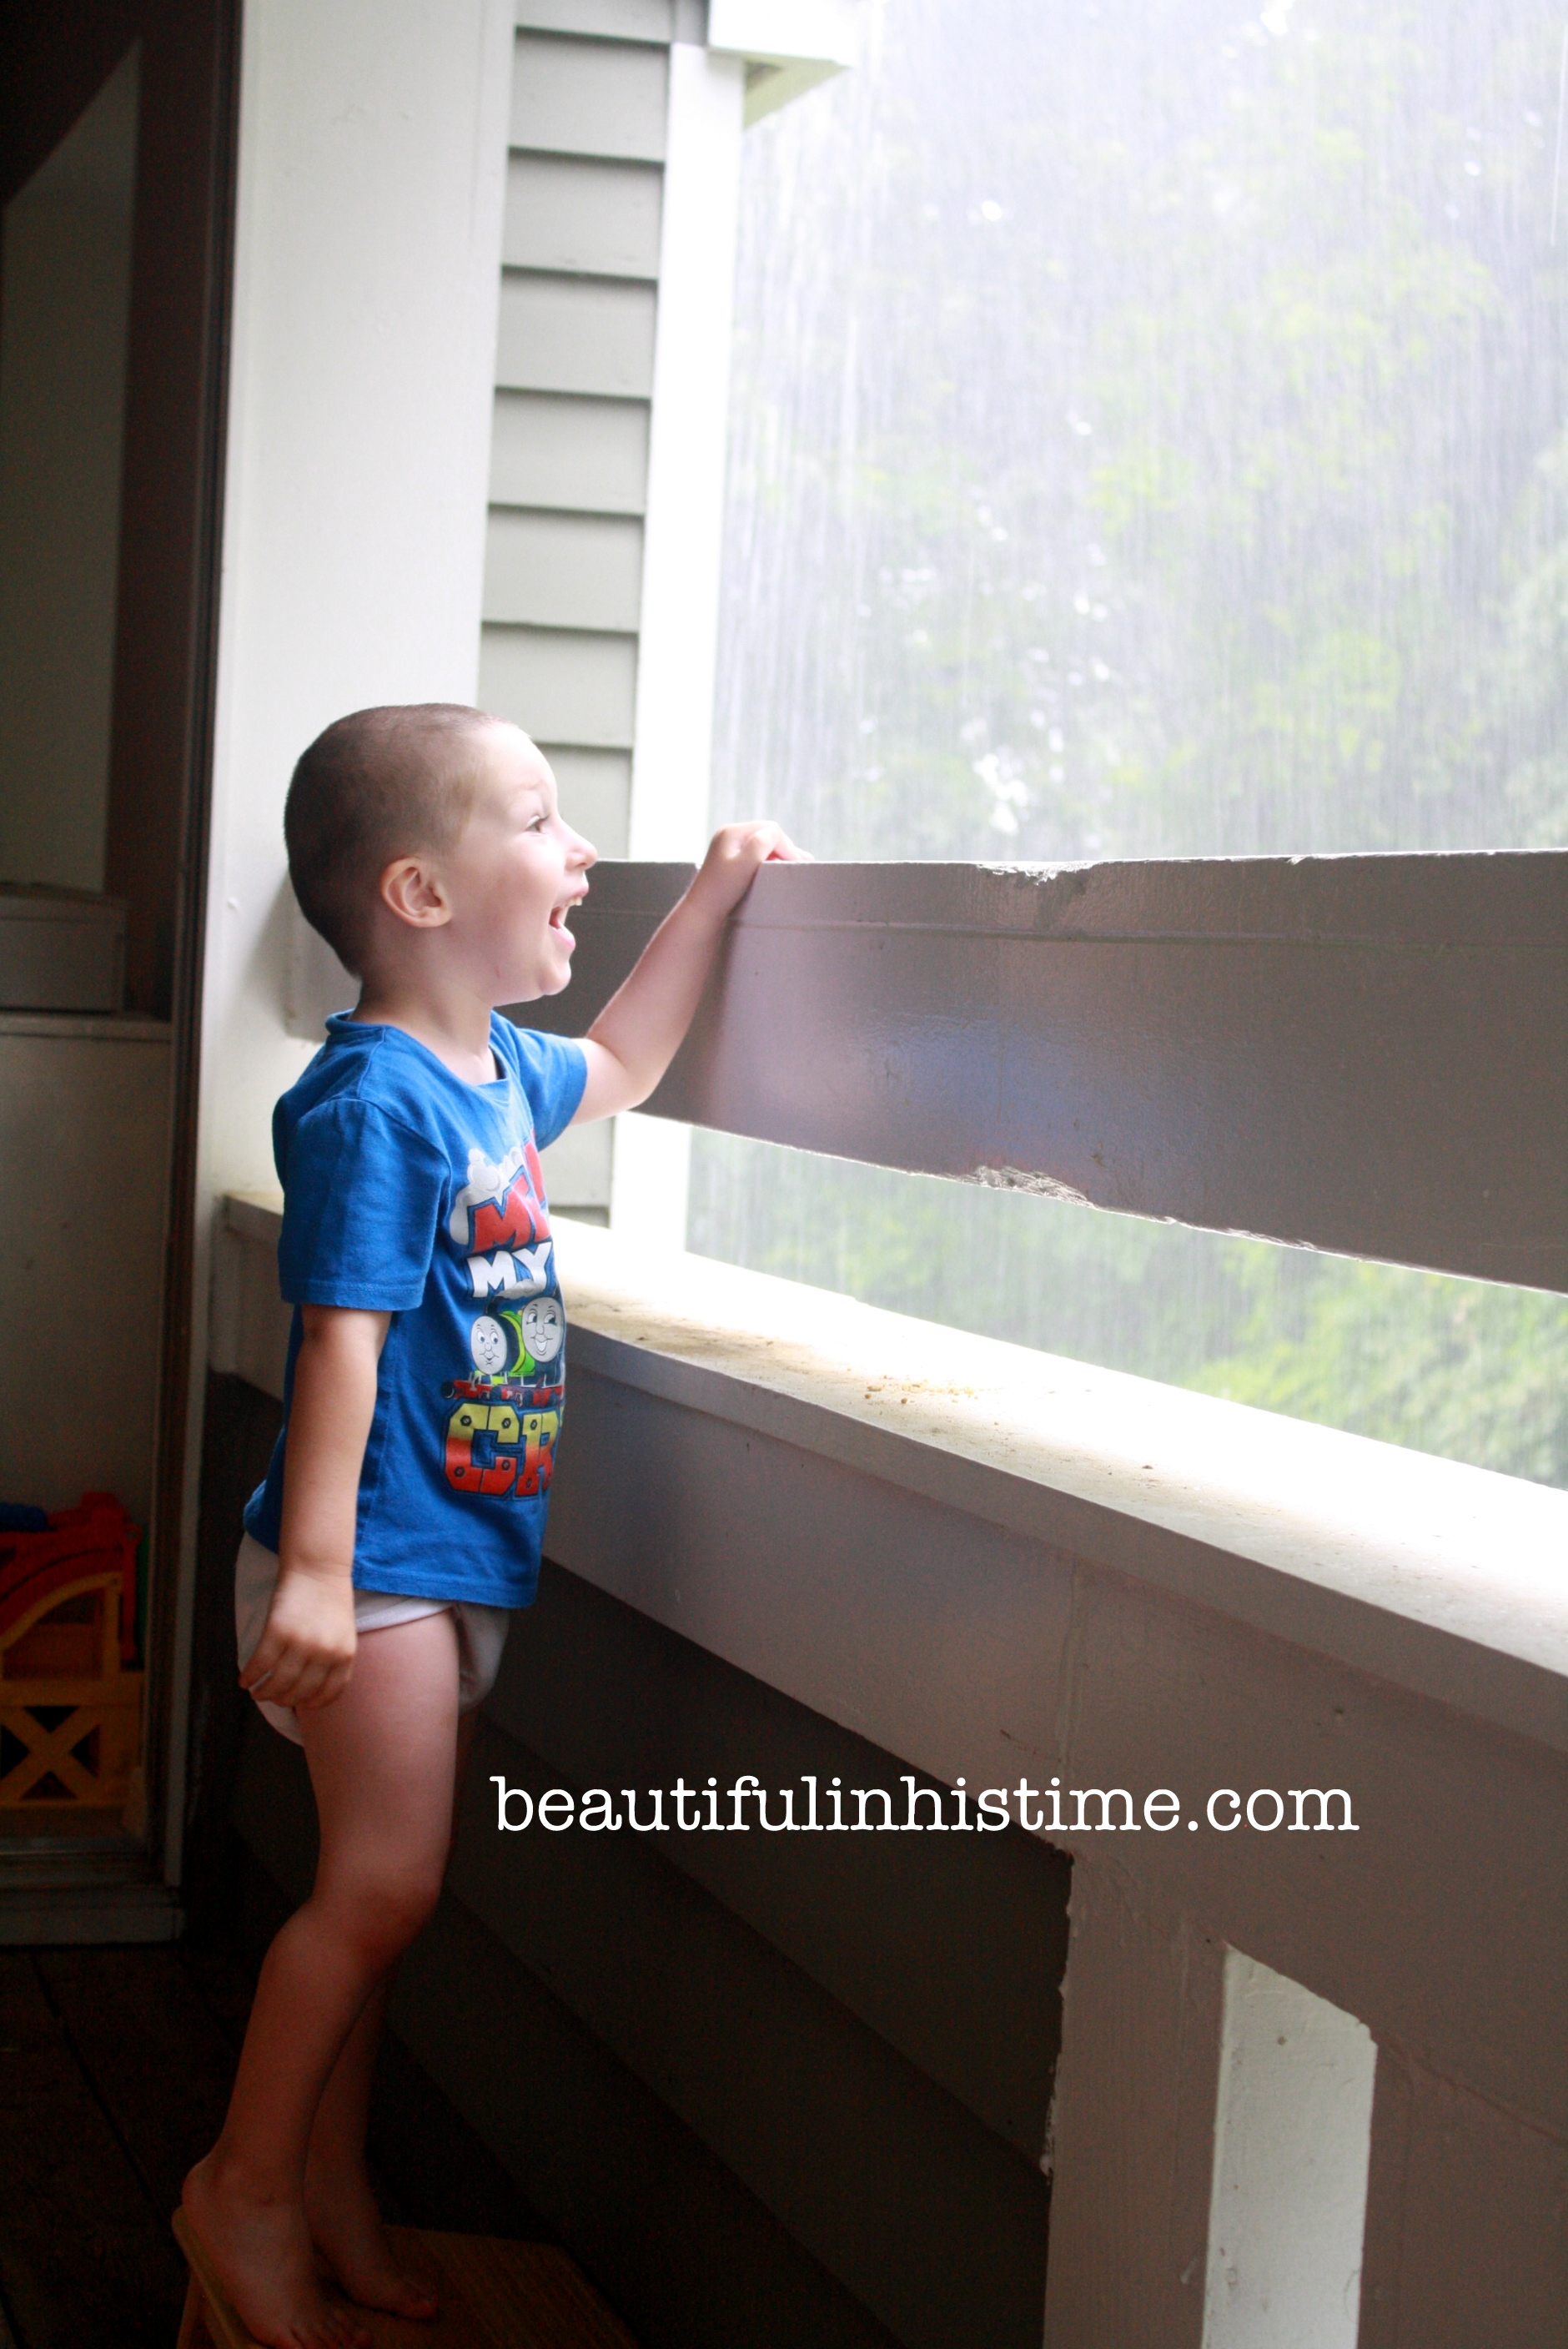 watching the rain Beauty in the Mess Edition 07.09.13 @beautifulinhistime.com